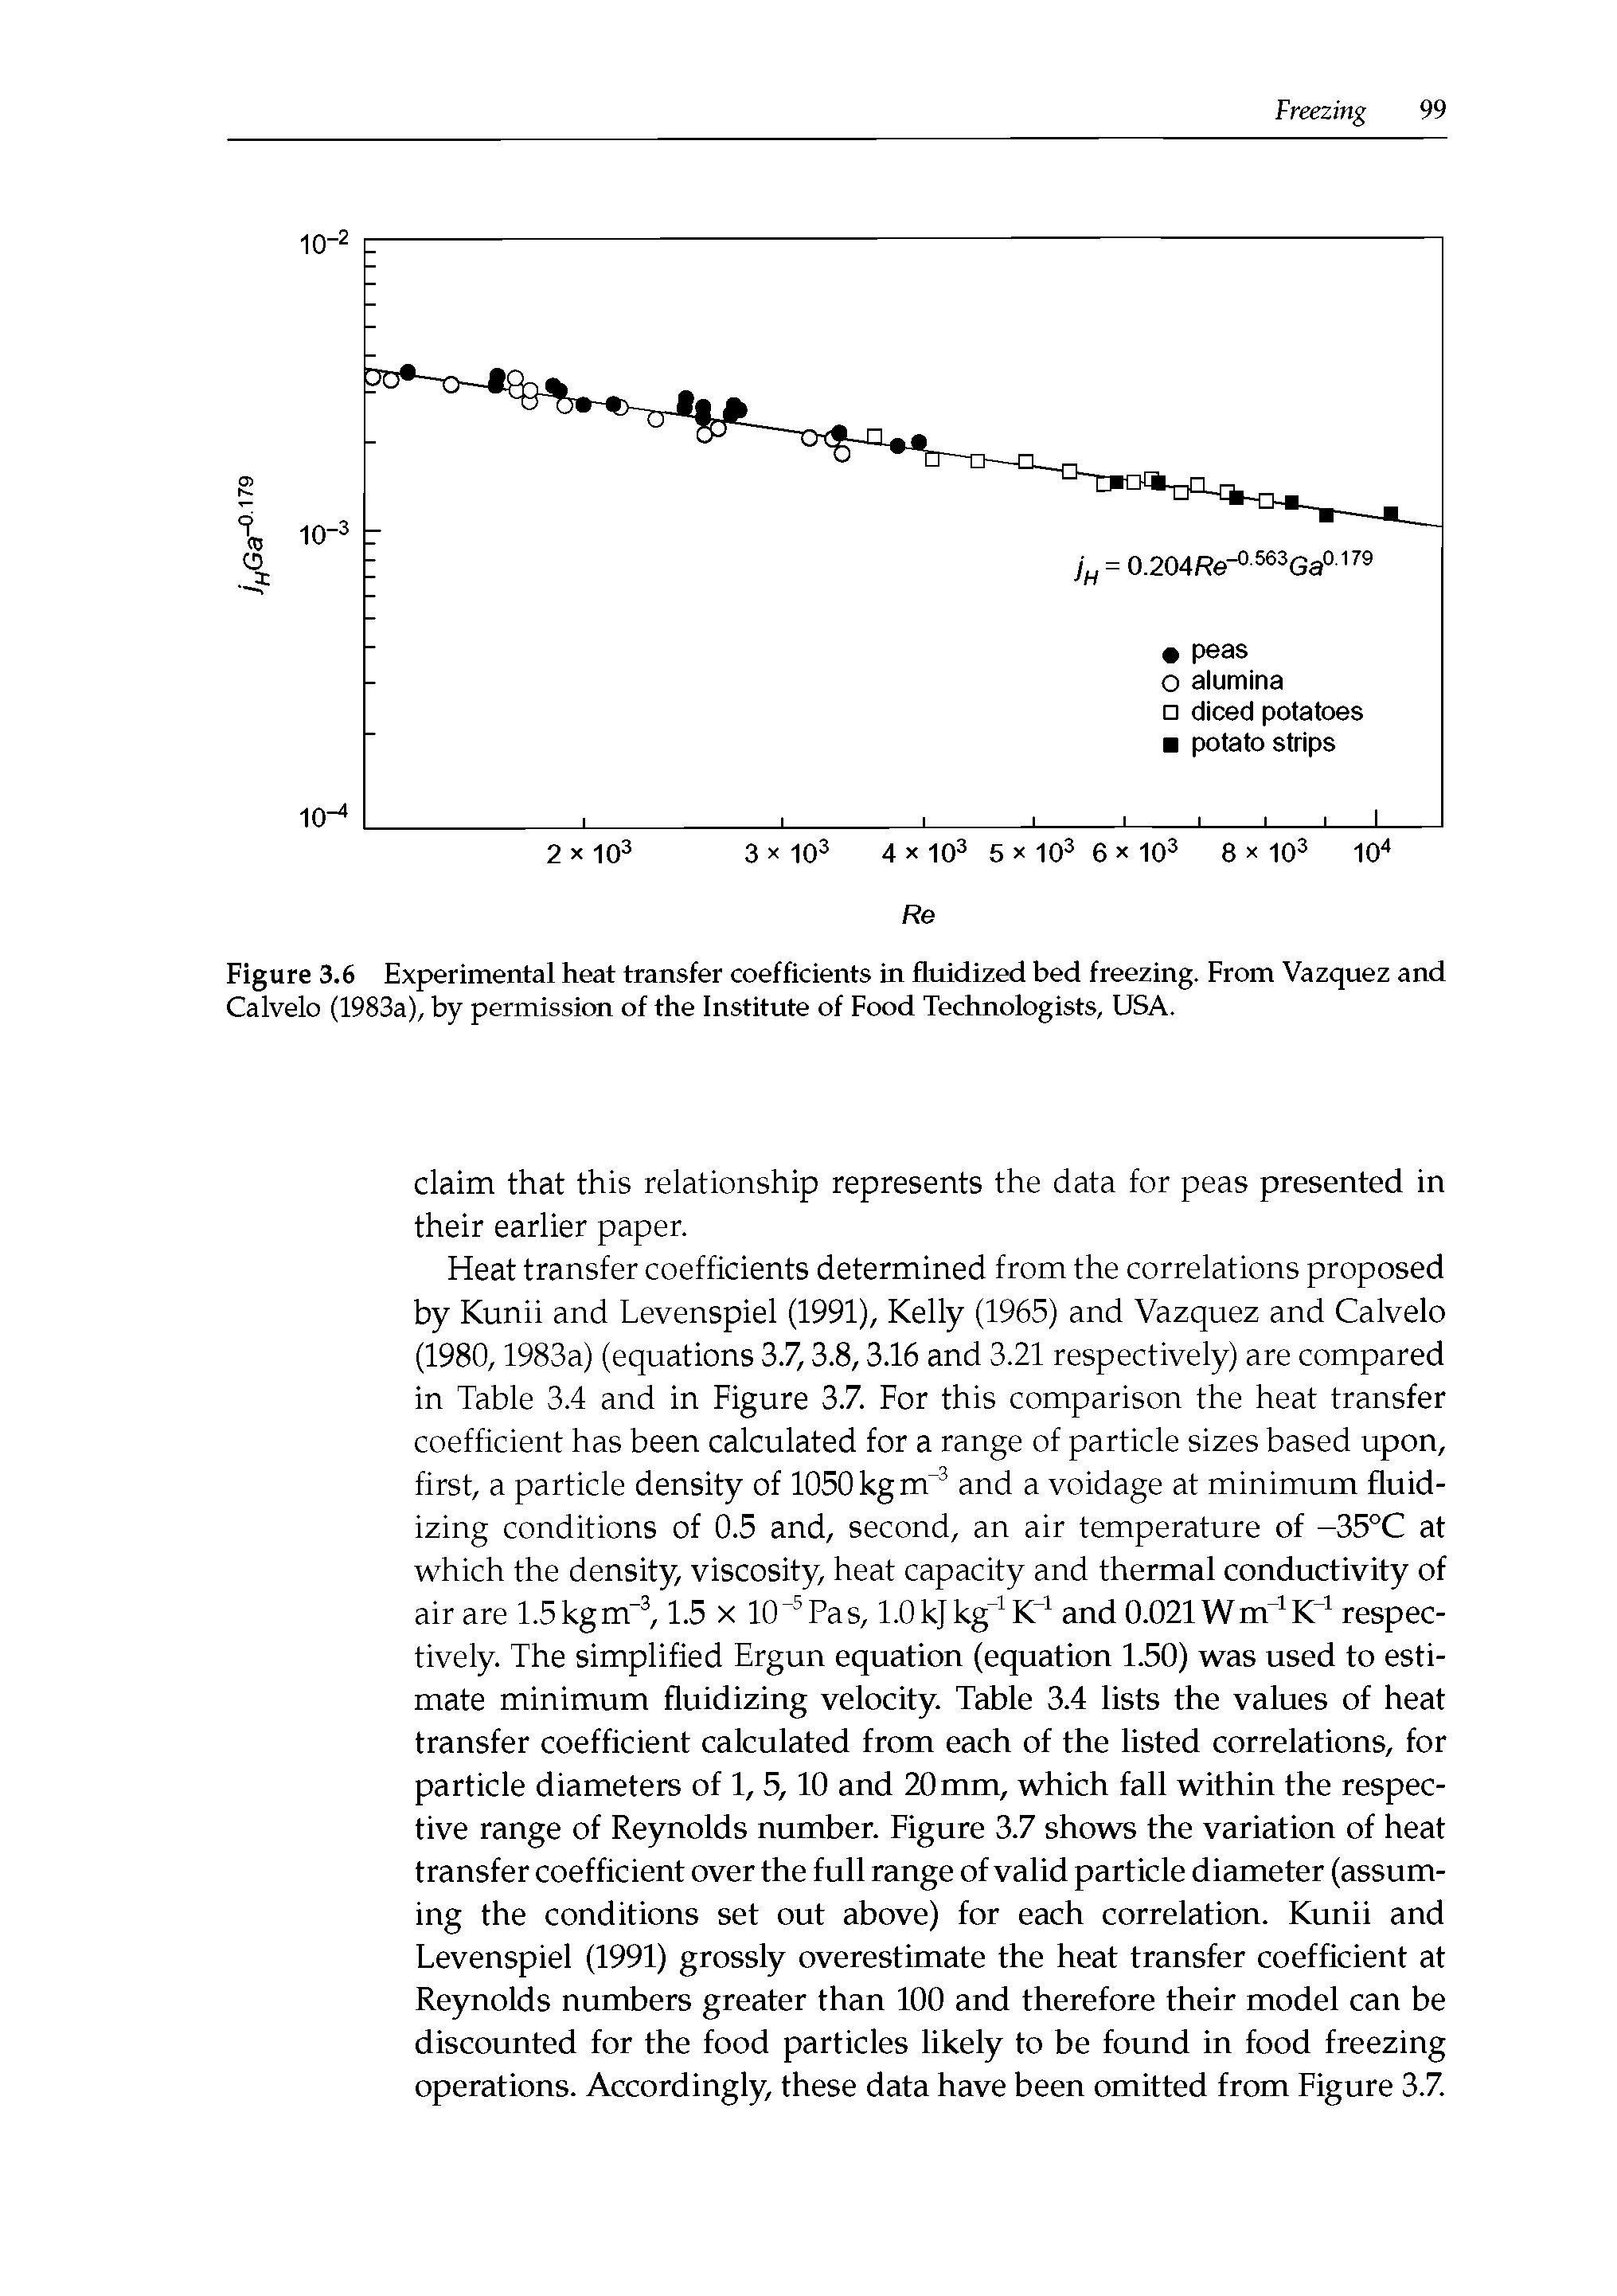 Figure 3.6 Experimental heat transfer coefficients in fluidized bed freezing. From Vazquez and Calvelo (1983a), by permission of the Institute of Food Technologists, USA.